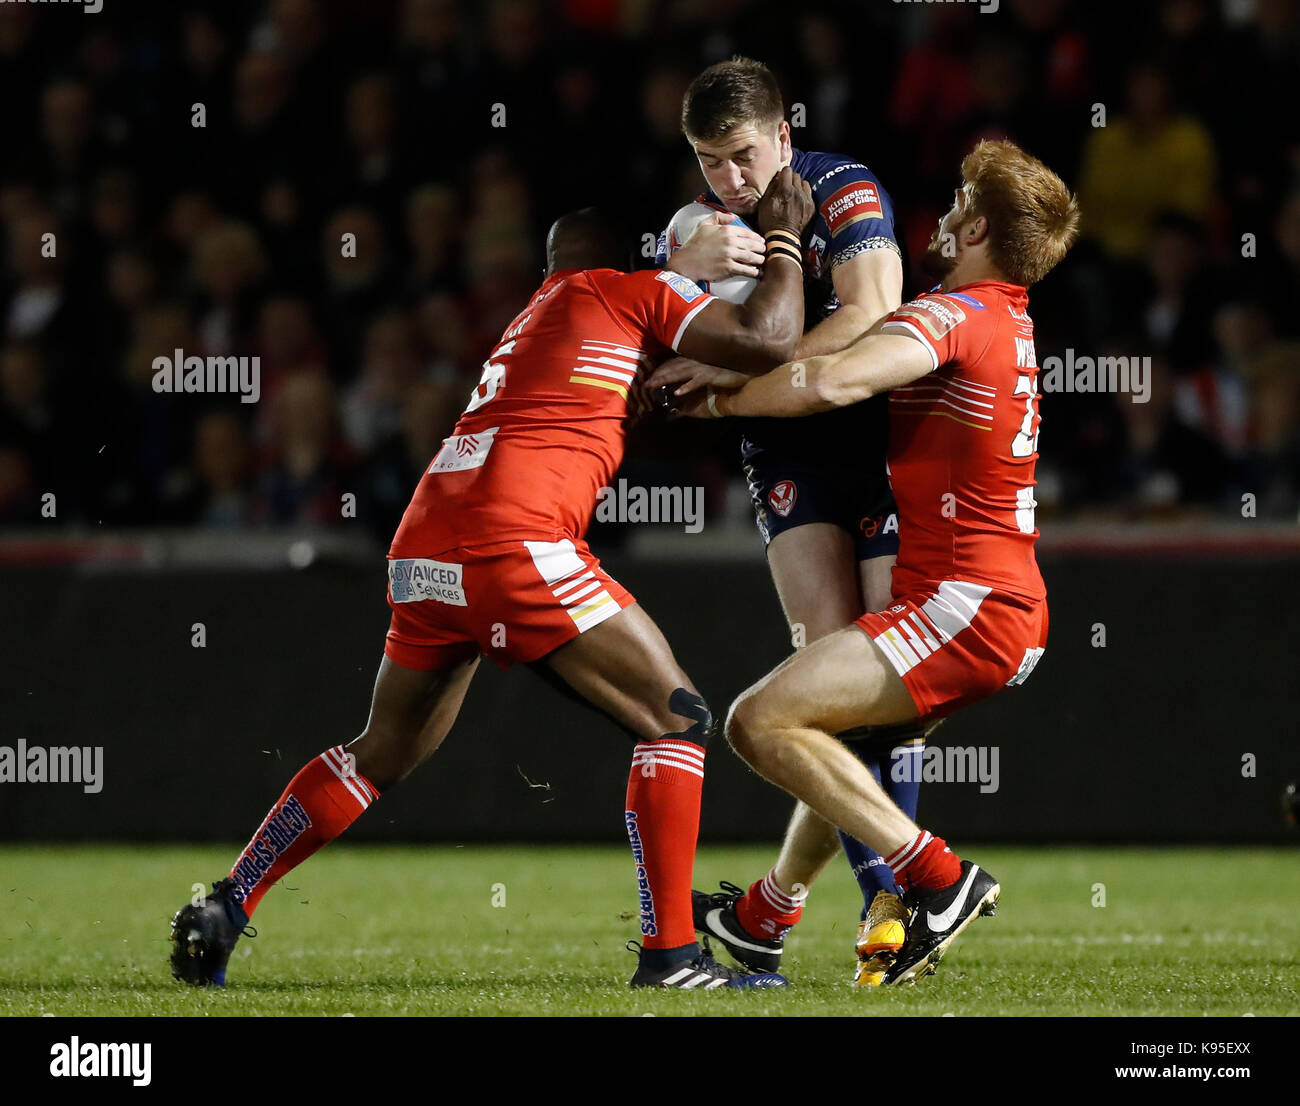 St Helens Mark Percival is tackled by Salford Red Devils' Rob Lui (left) and Kris Welham (right), during the Betfred Super 8s match at the AJ Bell Stadium, Salford. Stock Photo